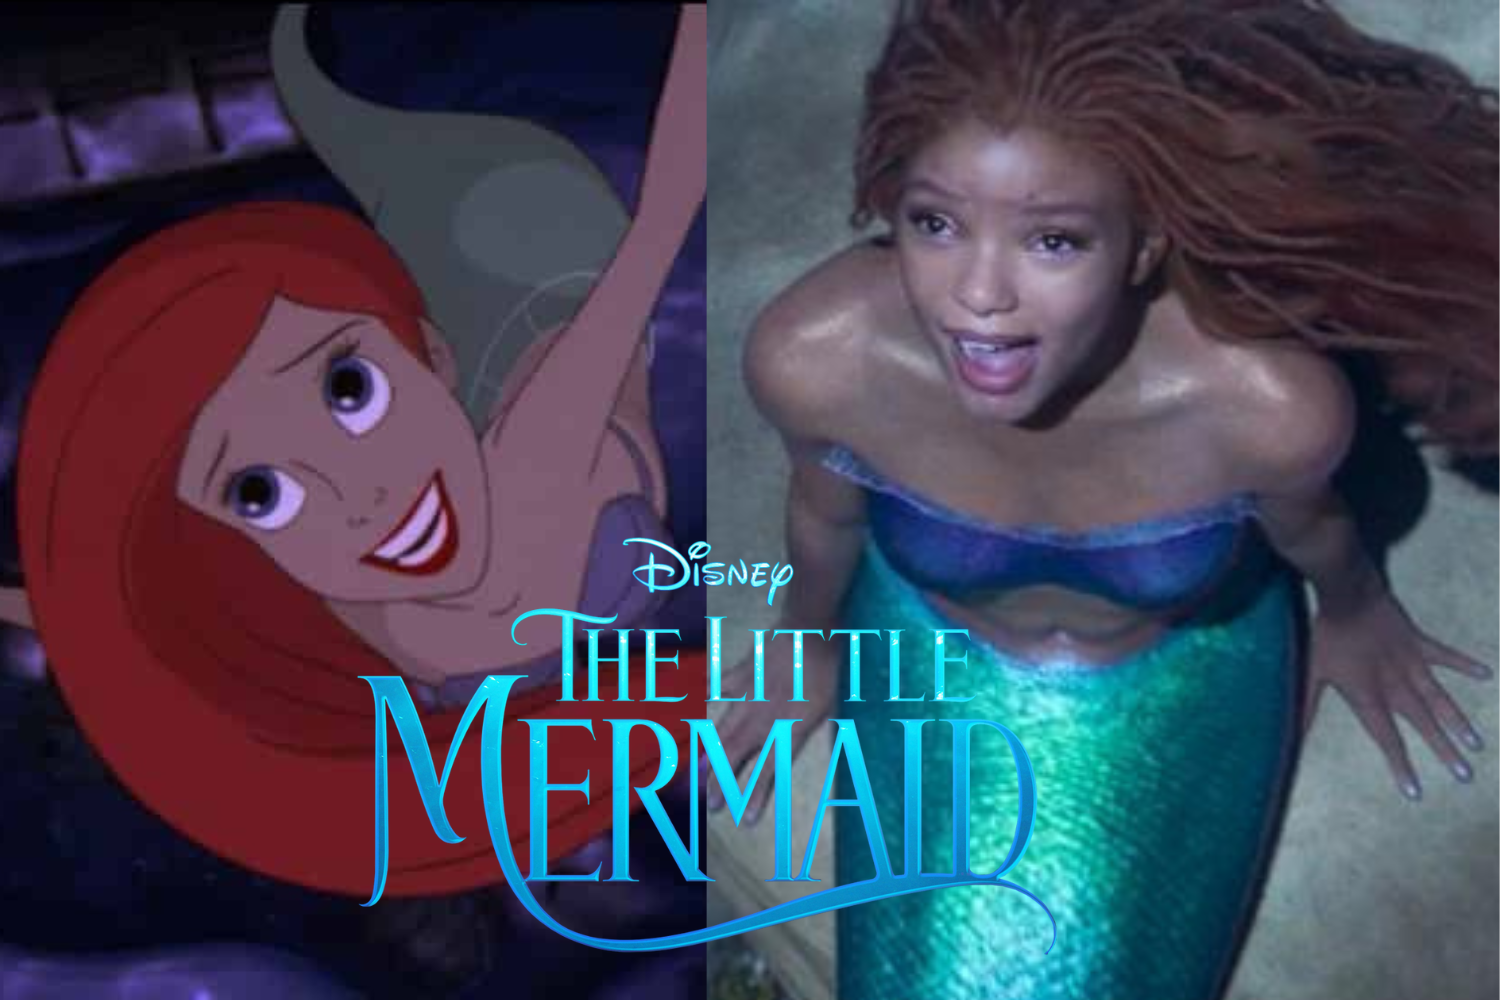 Defending the live-action Disney remakes (mostly)